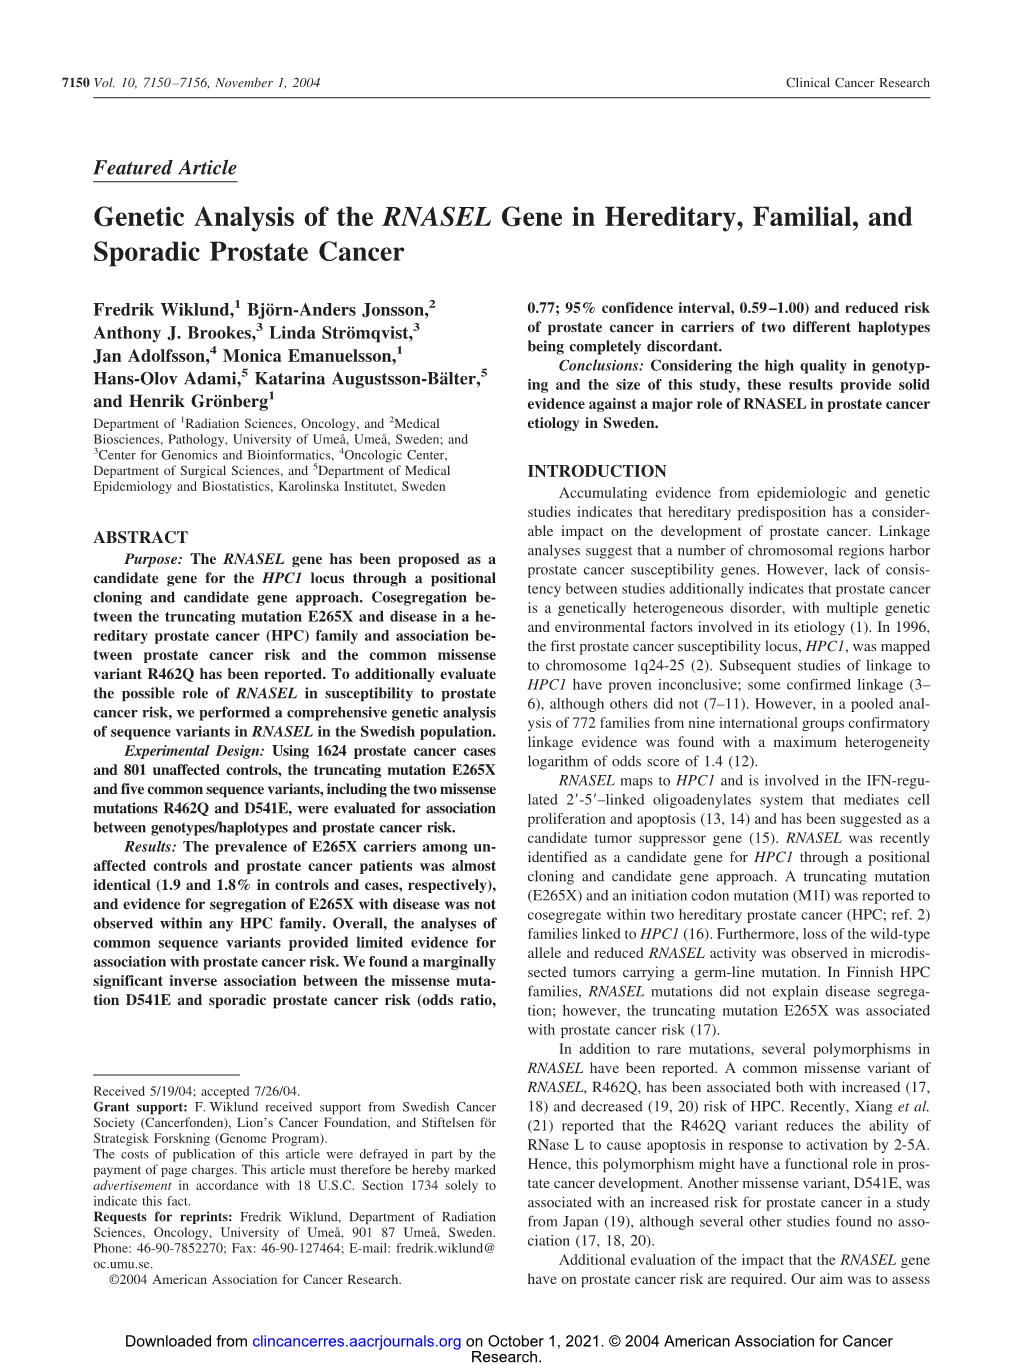 Genetic Analysis of the RNASEL Gene in Hereditary, Familial, and Sporadic Prostate Cancer